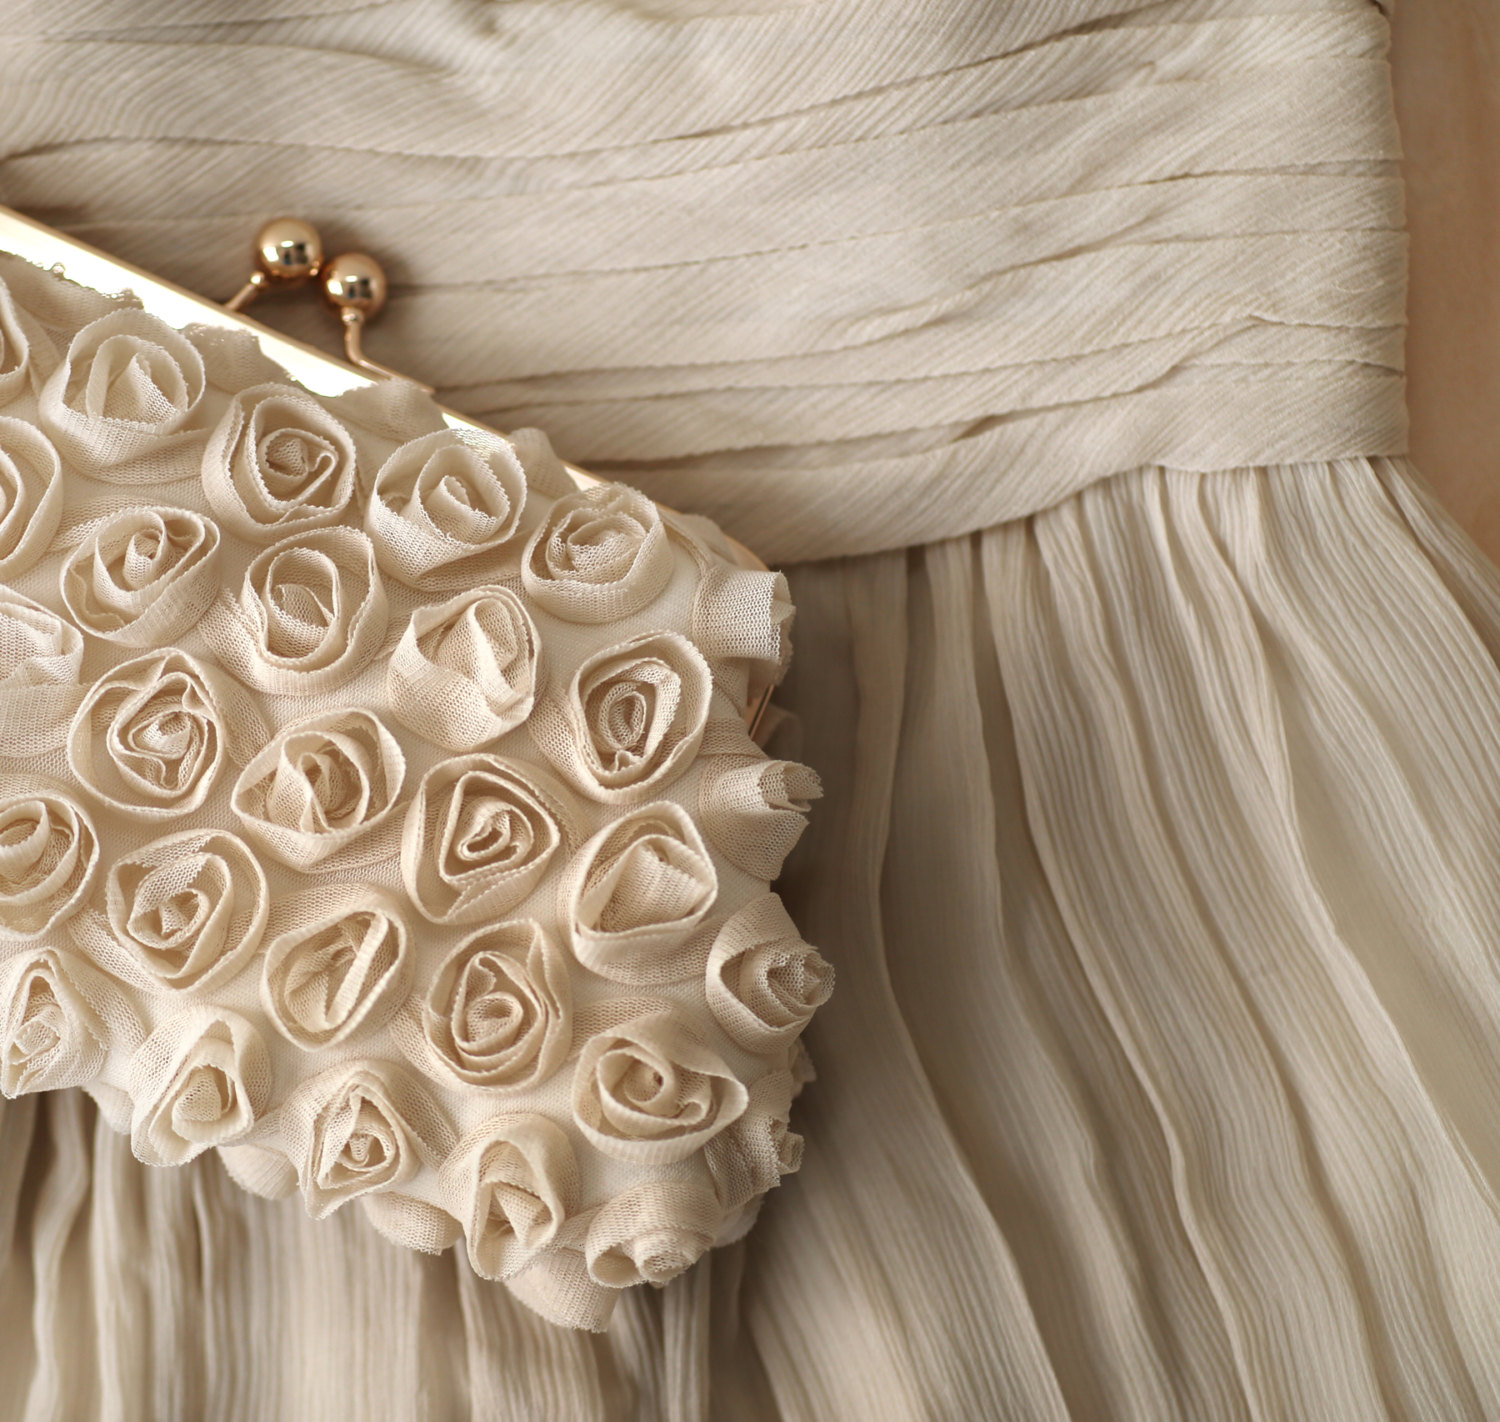 rosebuds floral clutch | flower bags clutches weddings by ANGEE W.